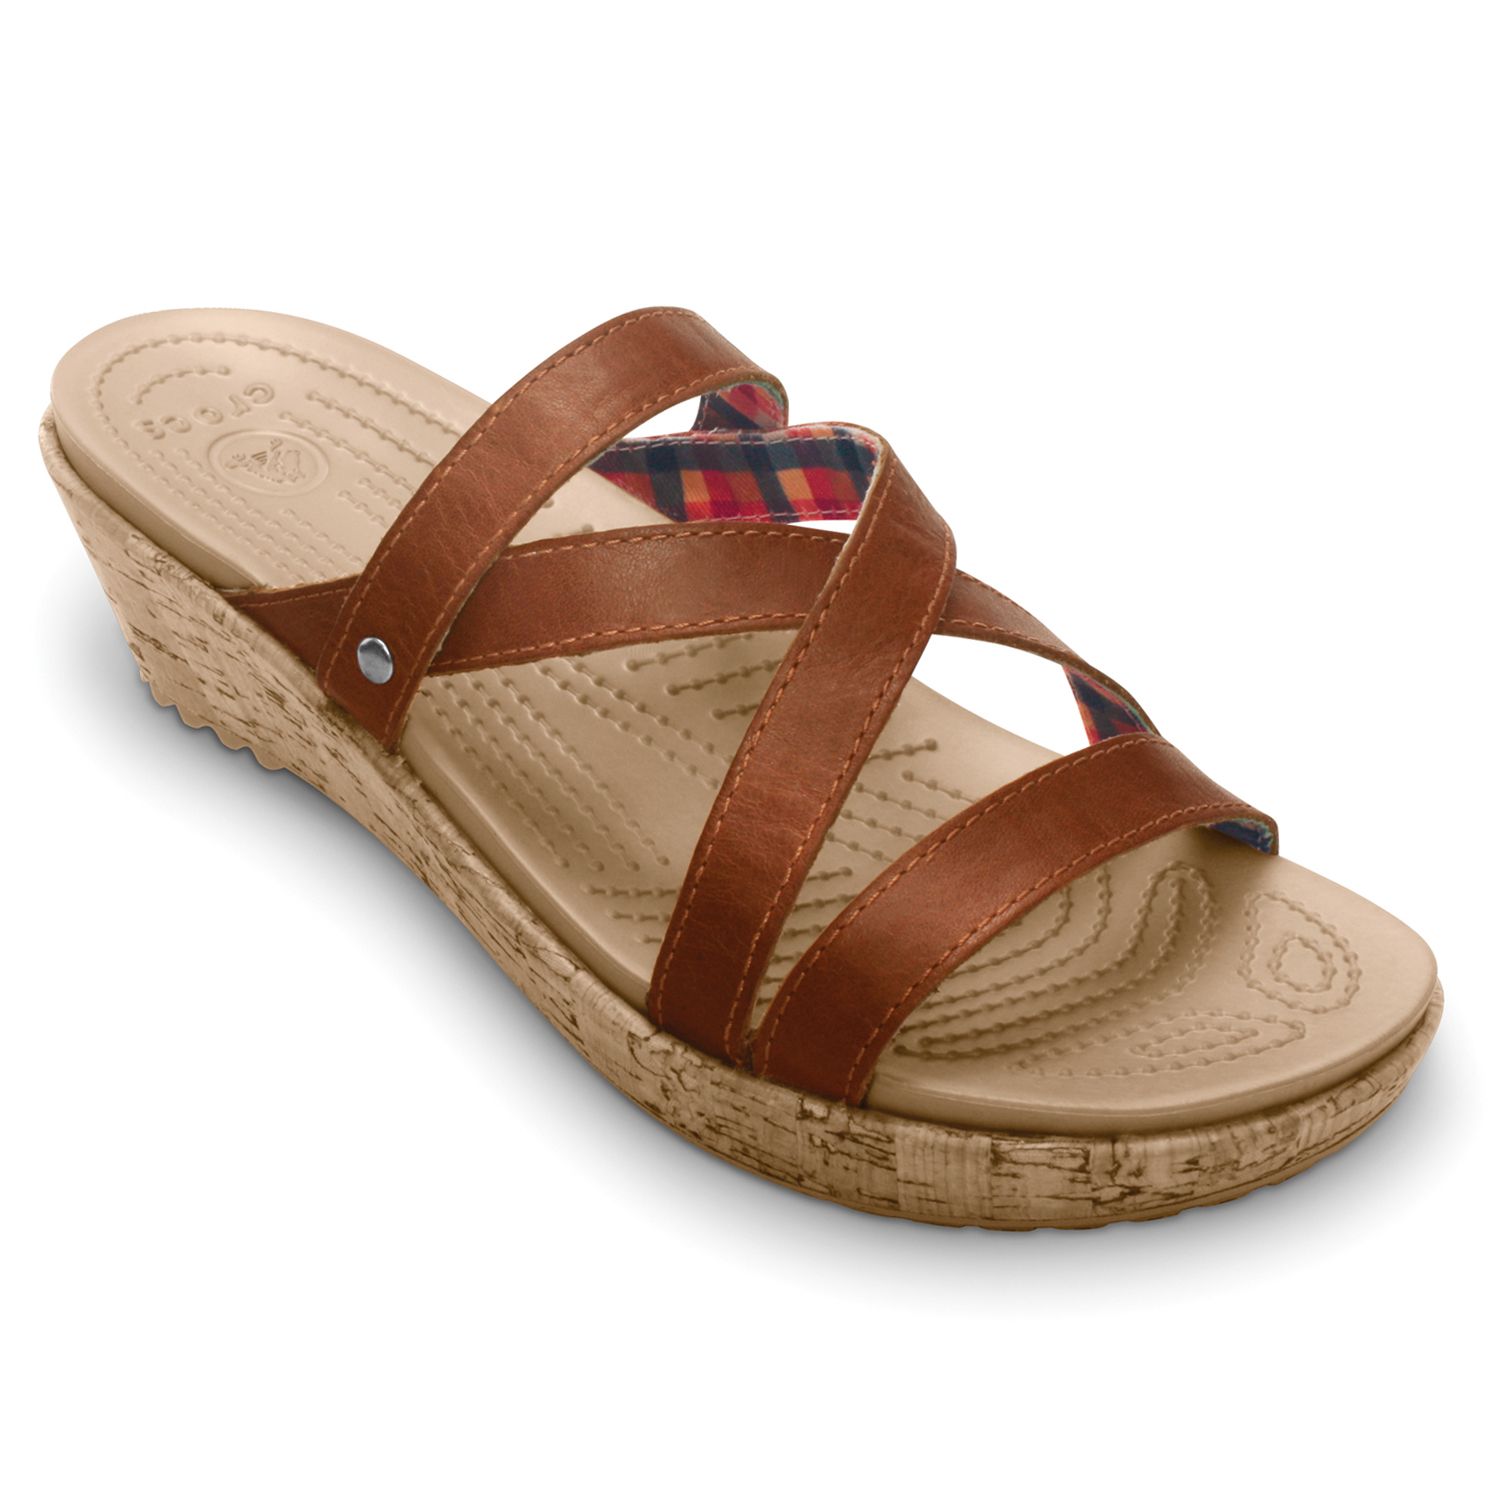 Crocs A-Leigh Leather Wedge Sandals - Women